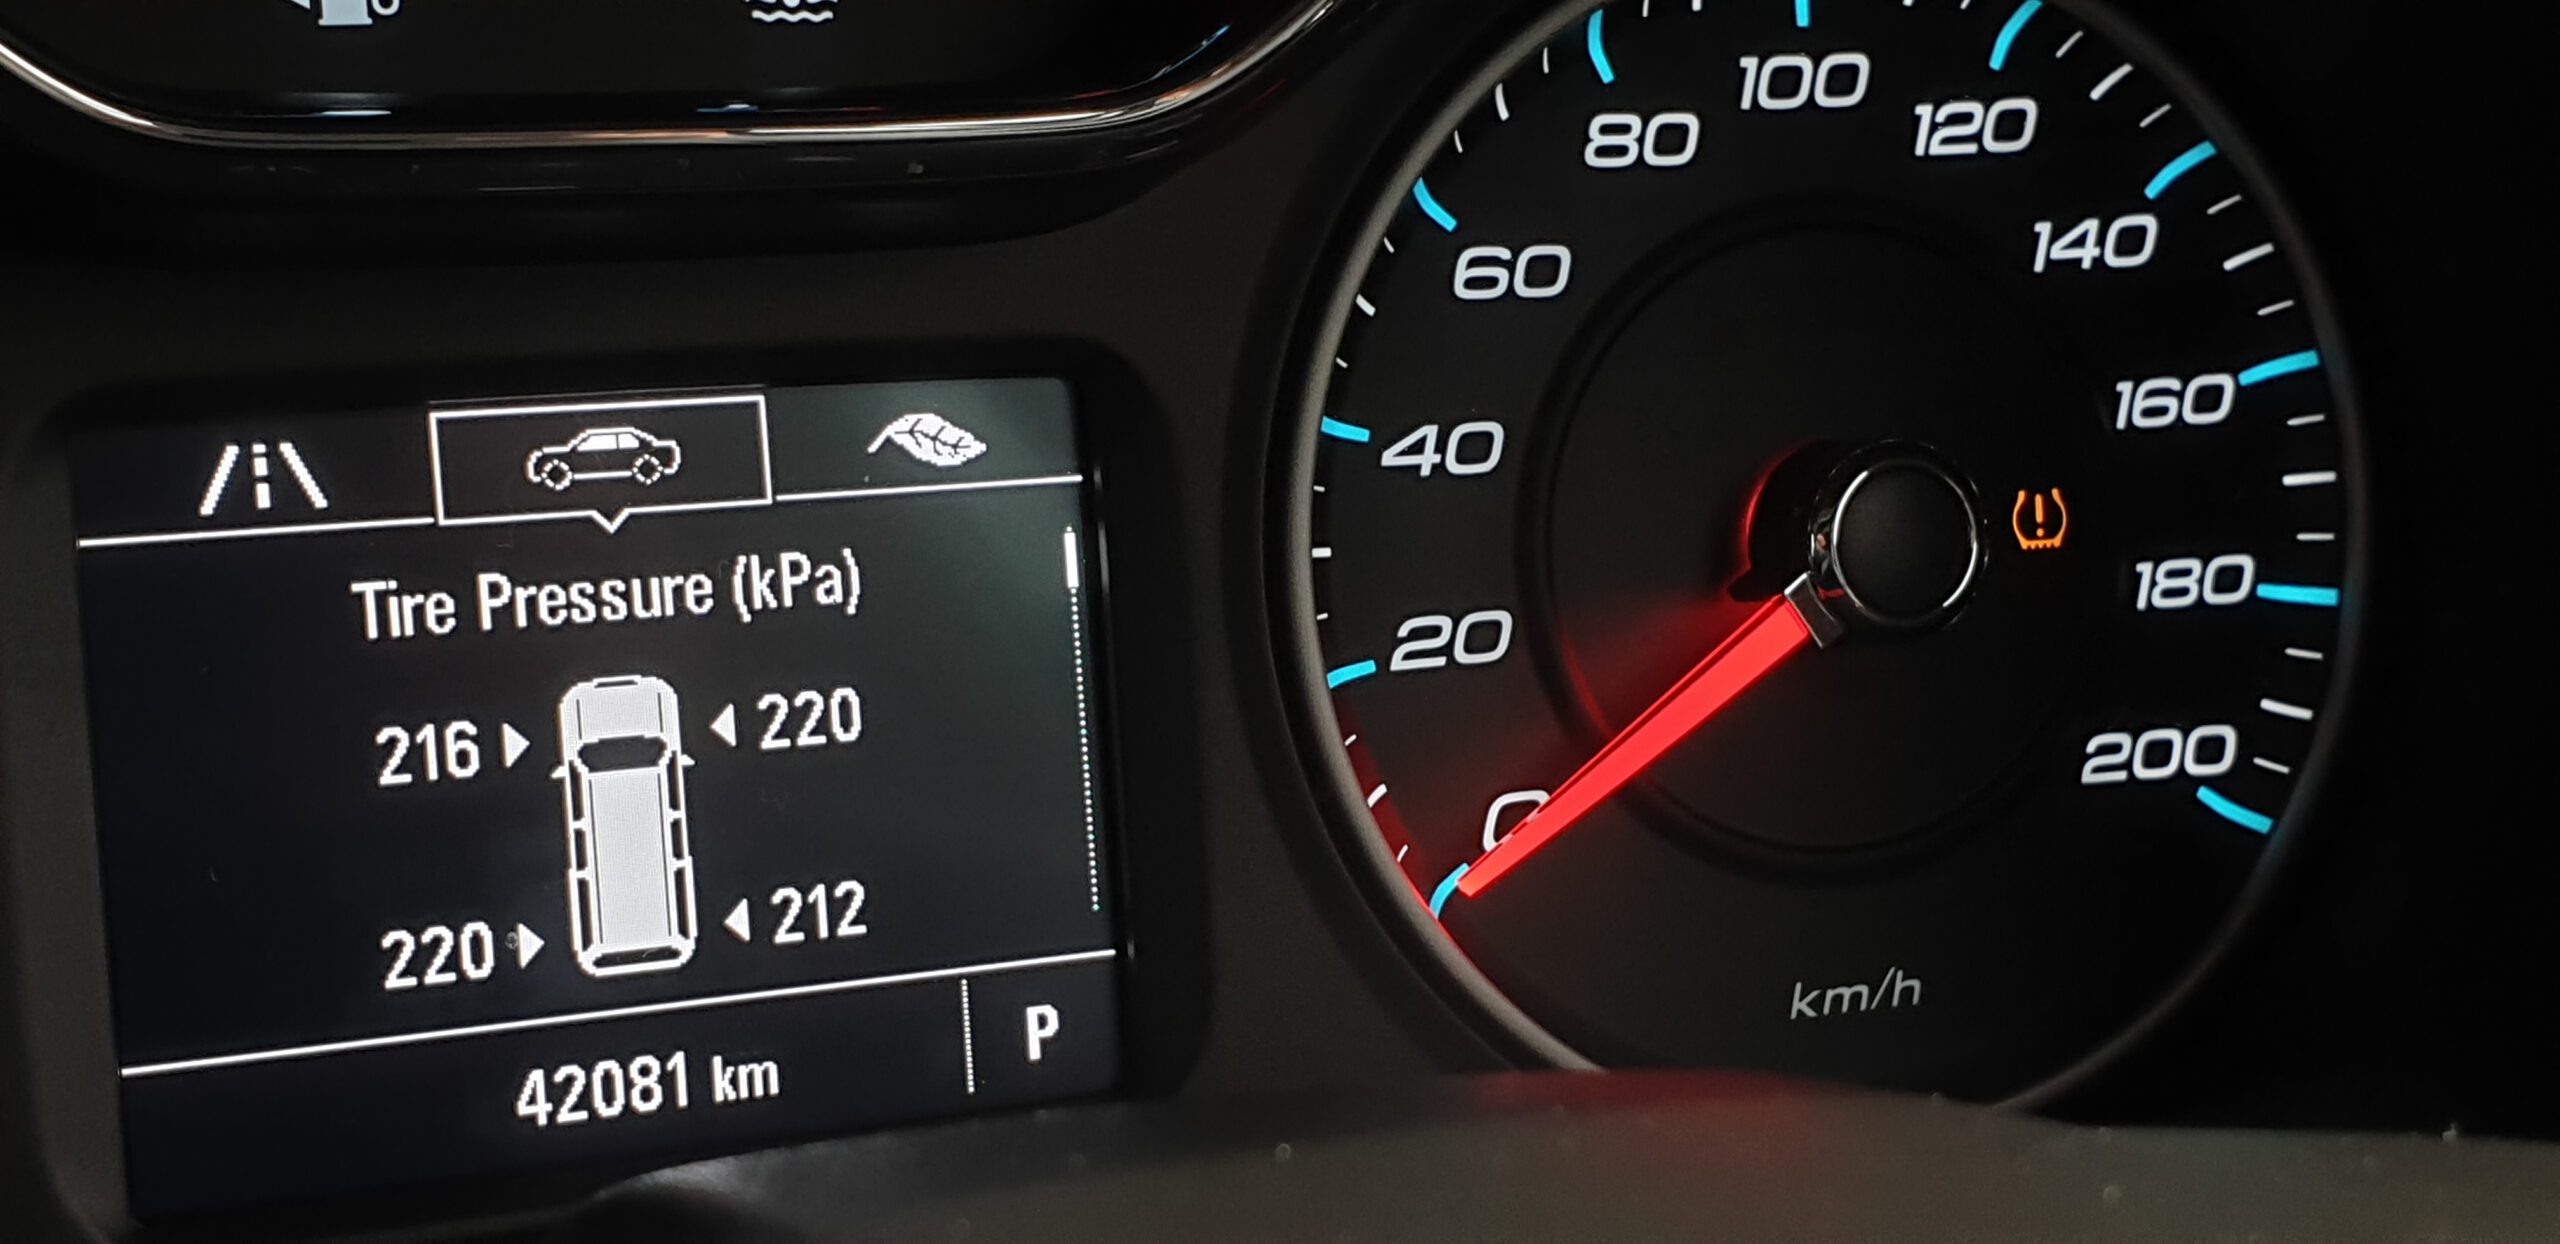 TPMS warning light on the car's dashboards, one of the wheels have air leak